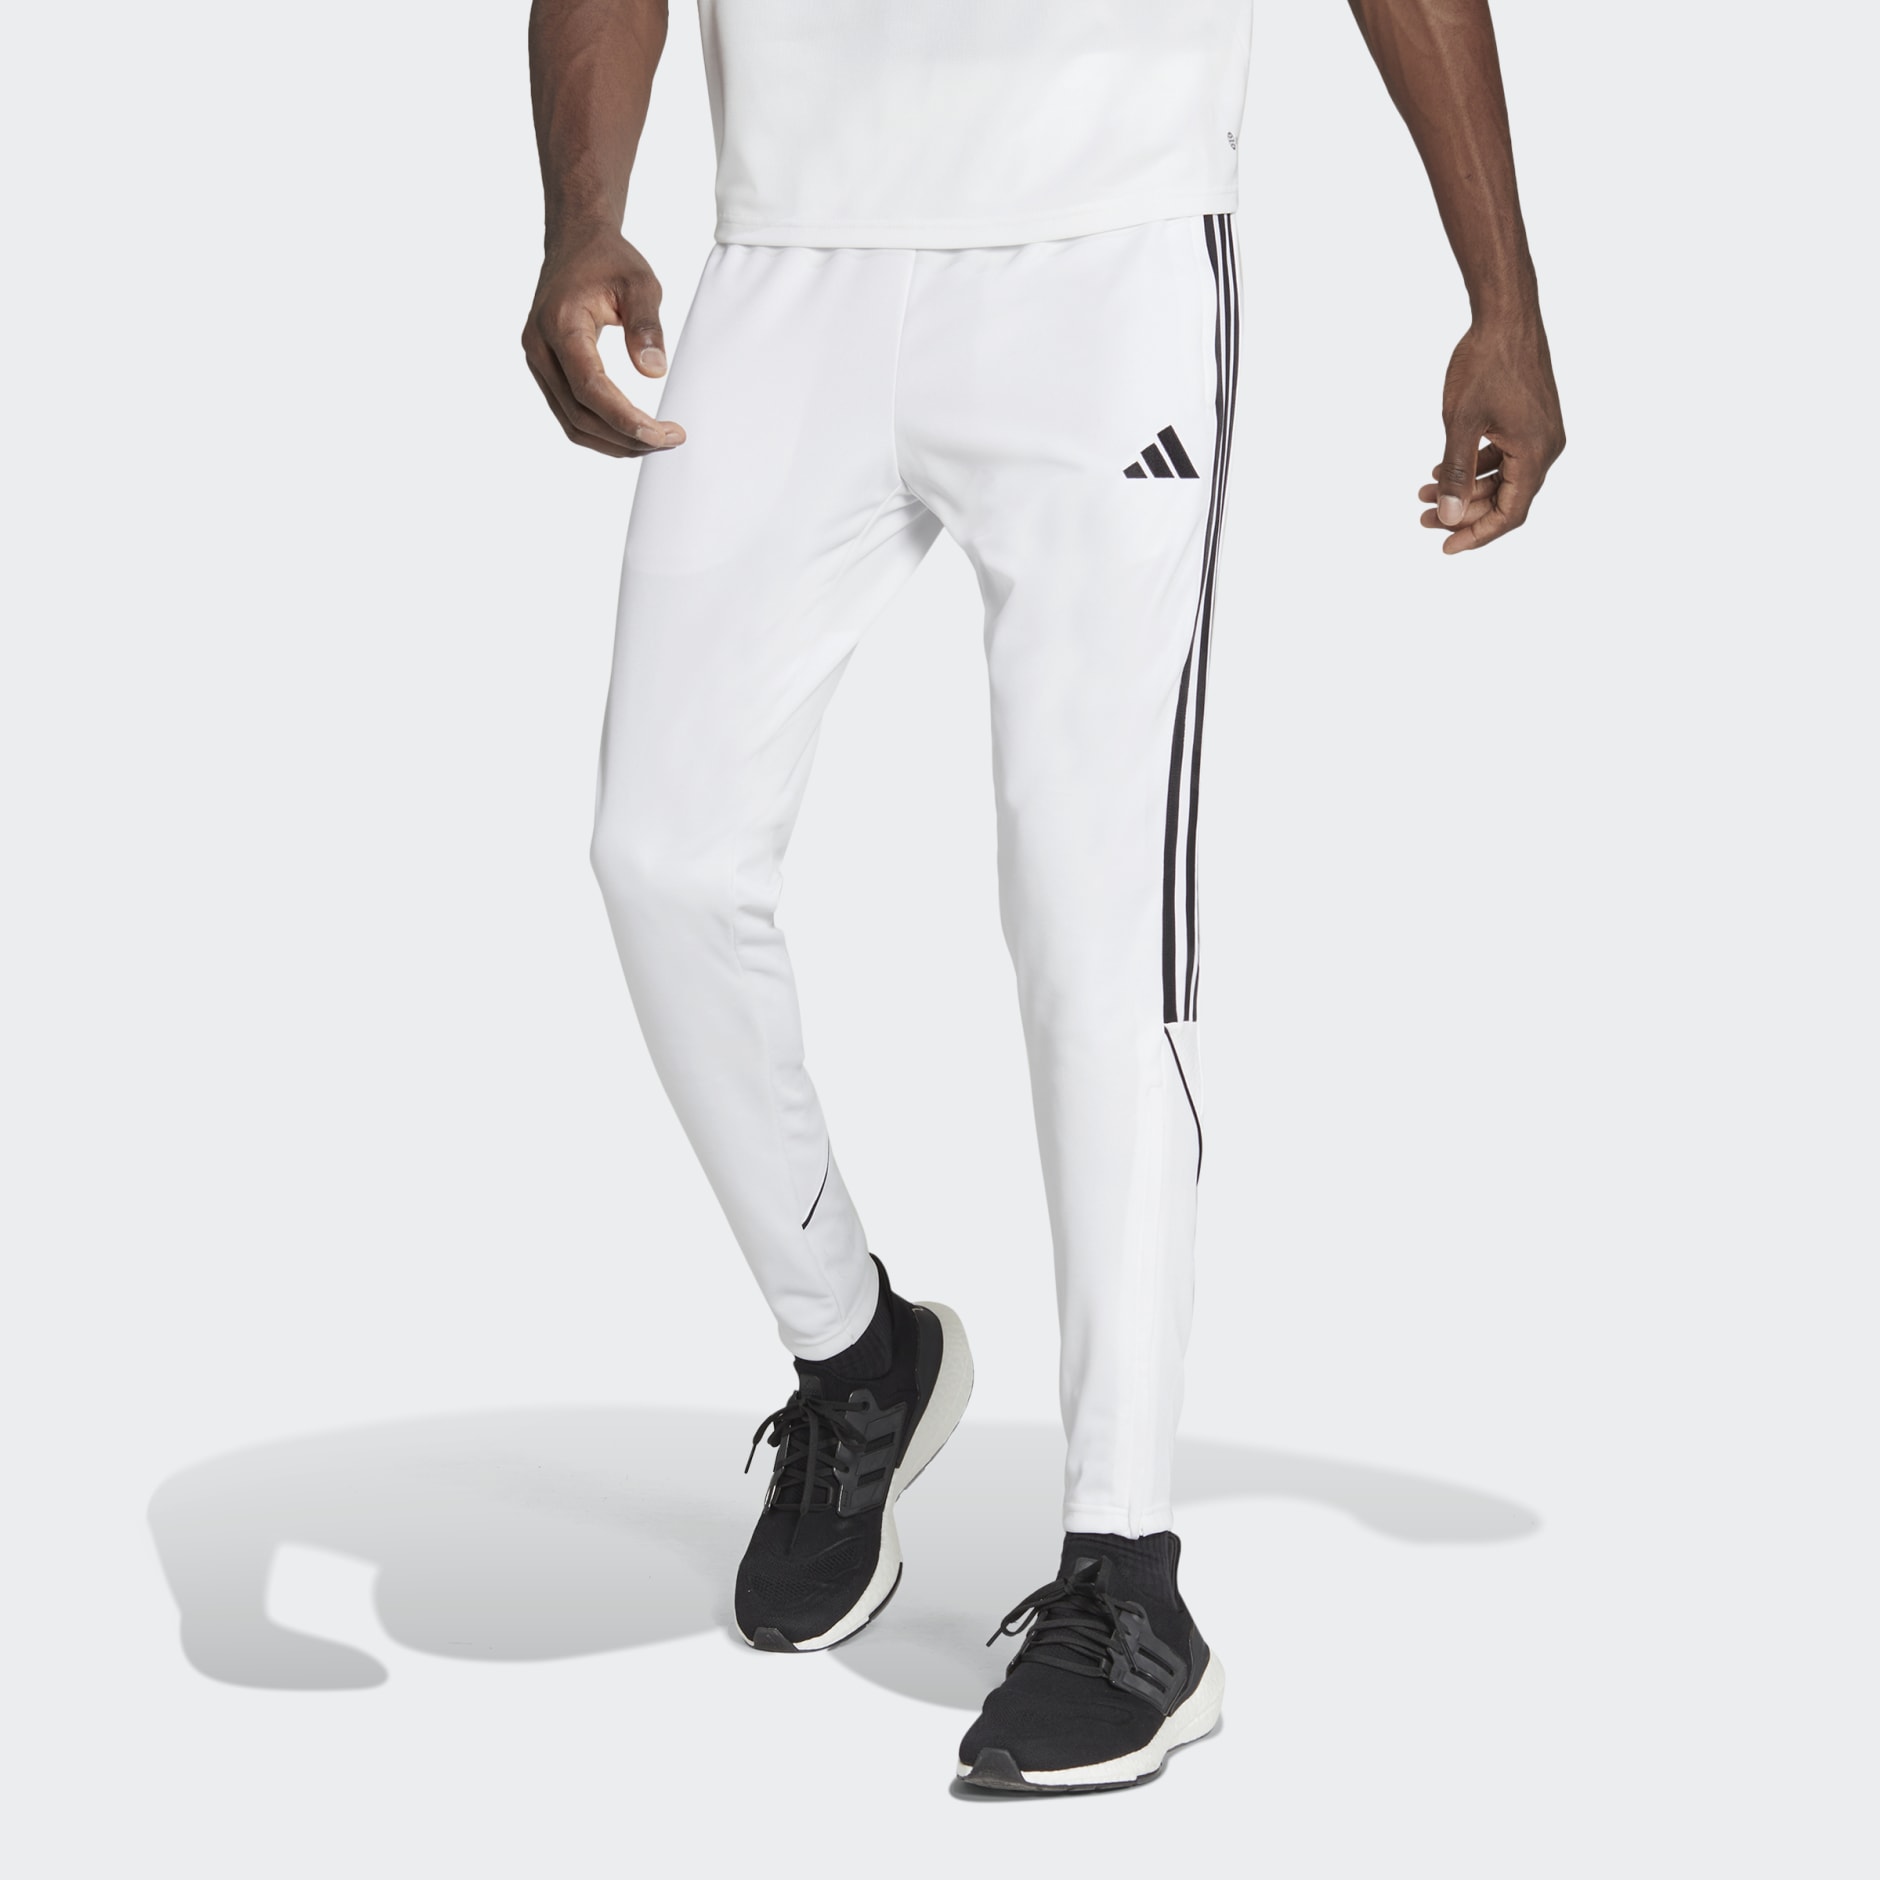 Buy Nivia Lords Cricket Pant Only - OFF WHITE / GREY From Fancode Shop.